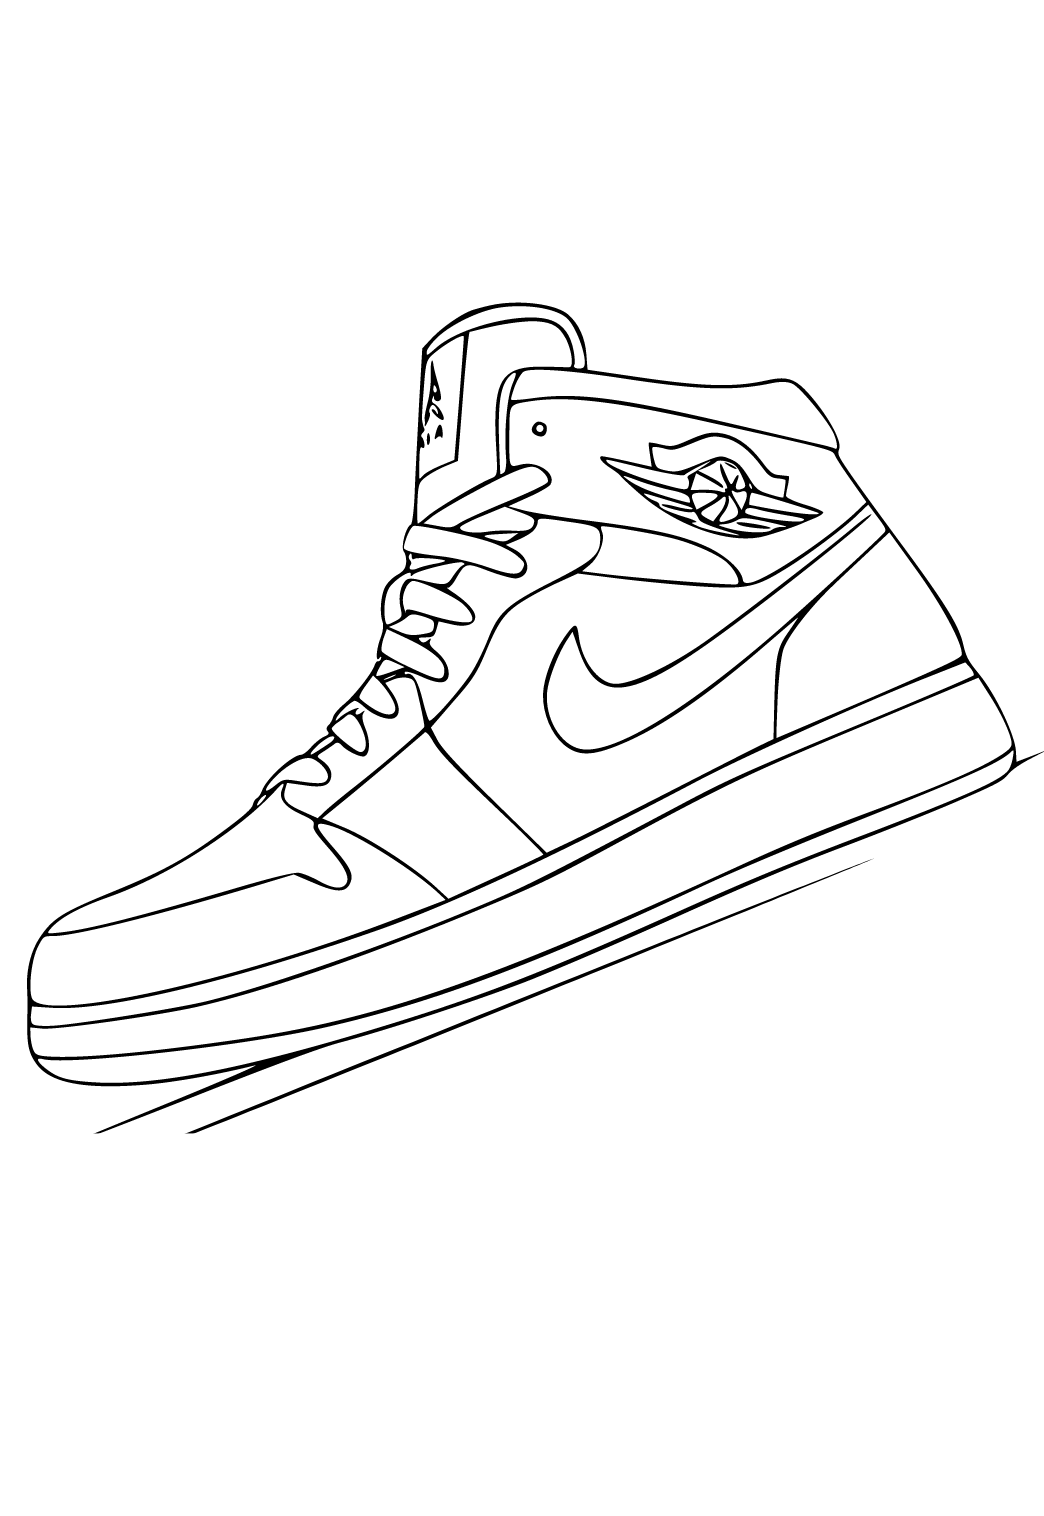 Free Printable Nike Emblem Coloring Page for Adults and Kids - Lystok.com